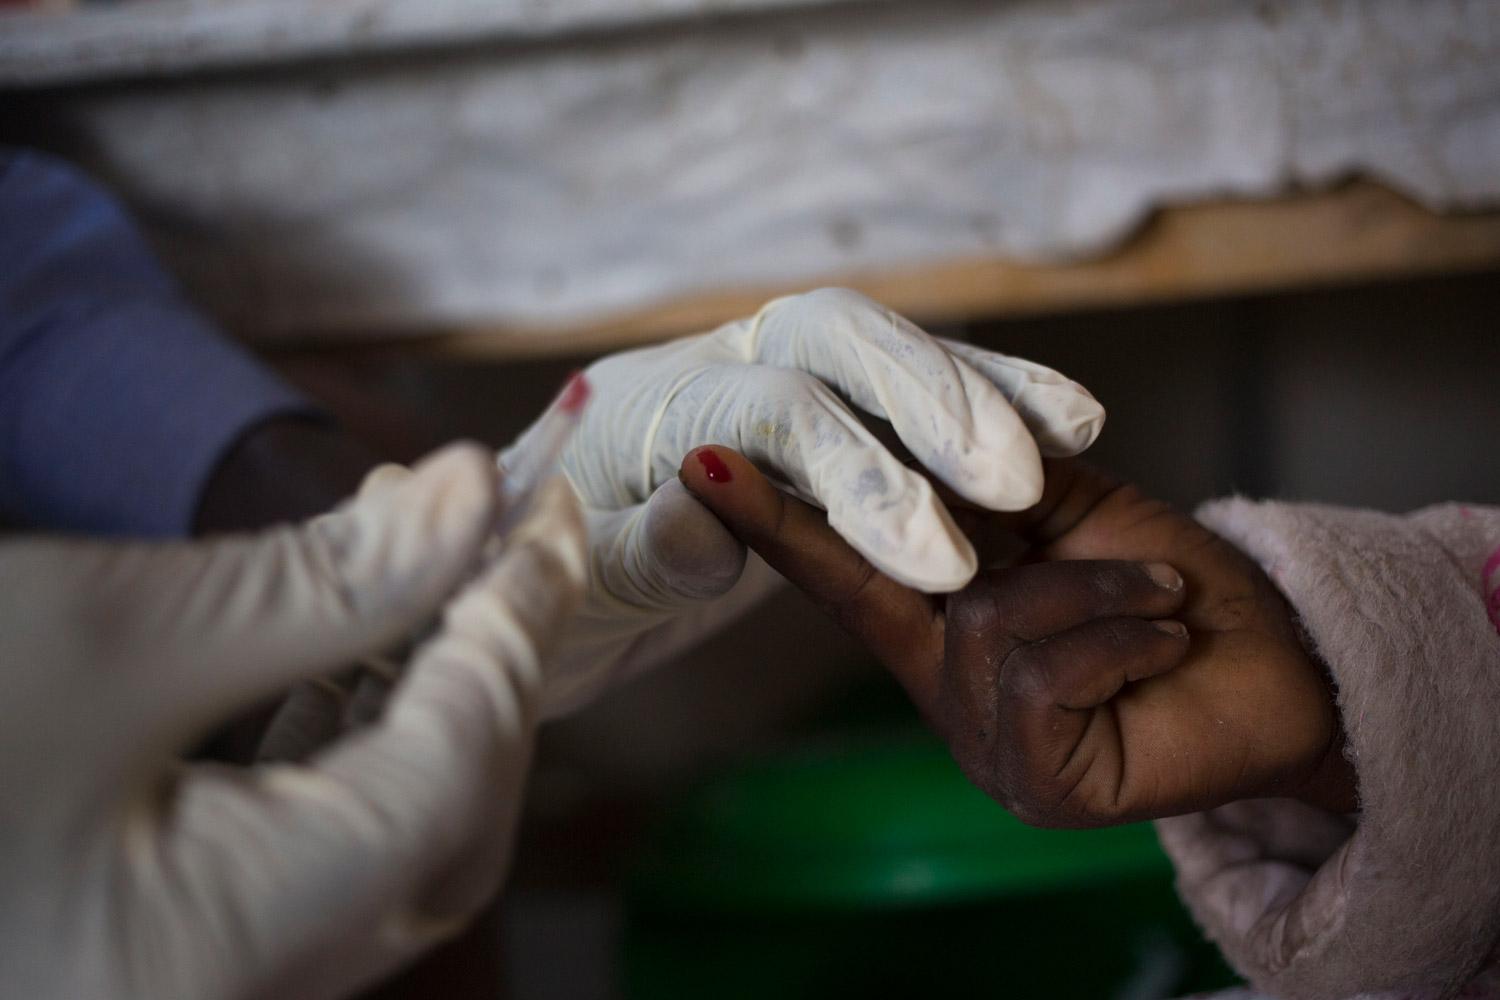 A child is tested for kala azar at the Médecins Sans Frontières (MSF) hospital in Lankien, South Sudan